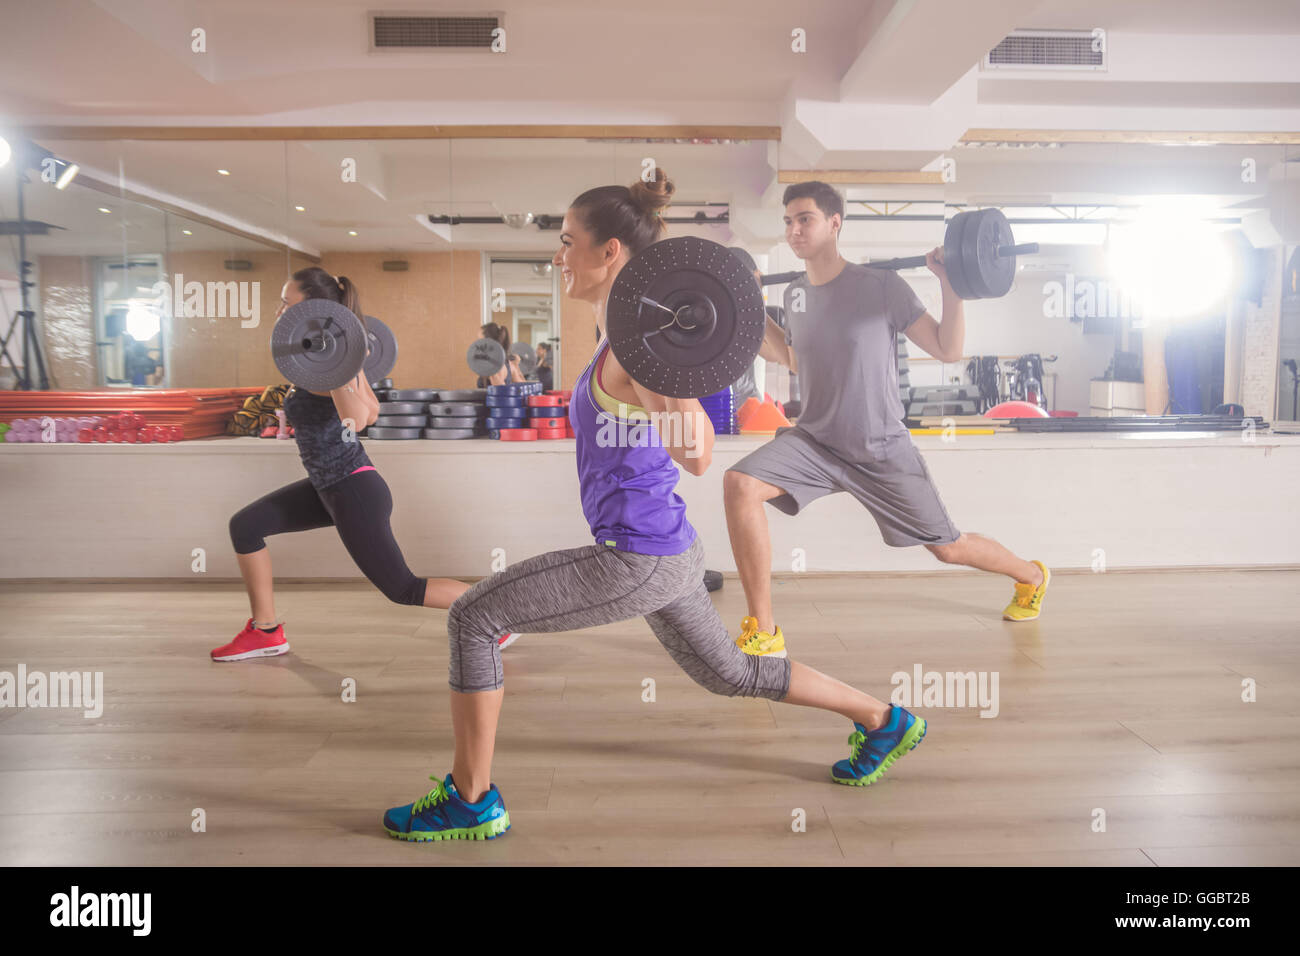 Three young people gym lunge weights bar women man Stock Photo